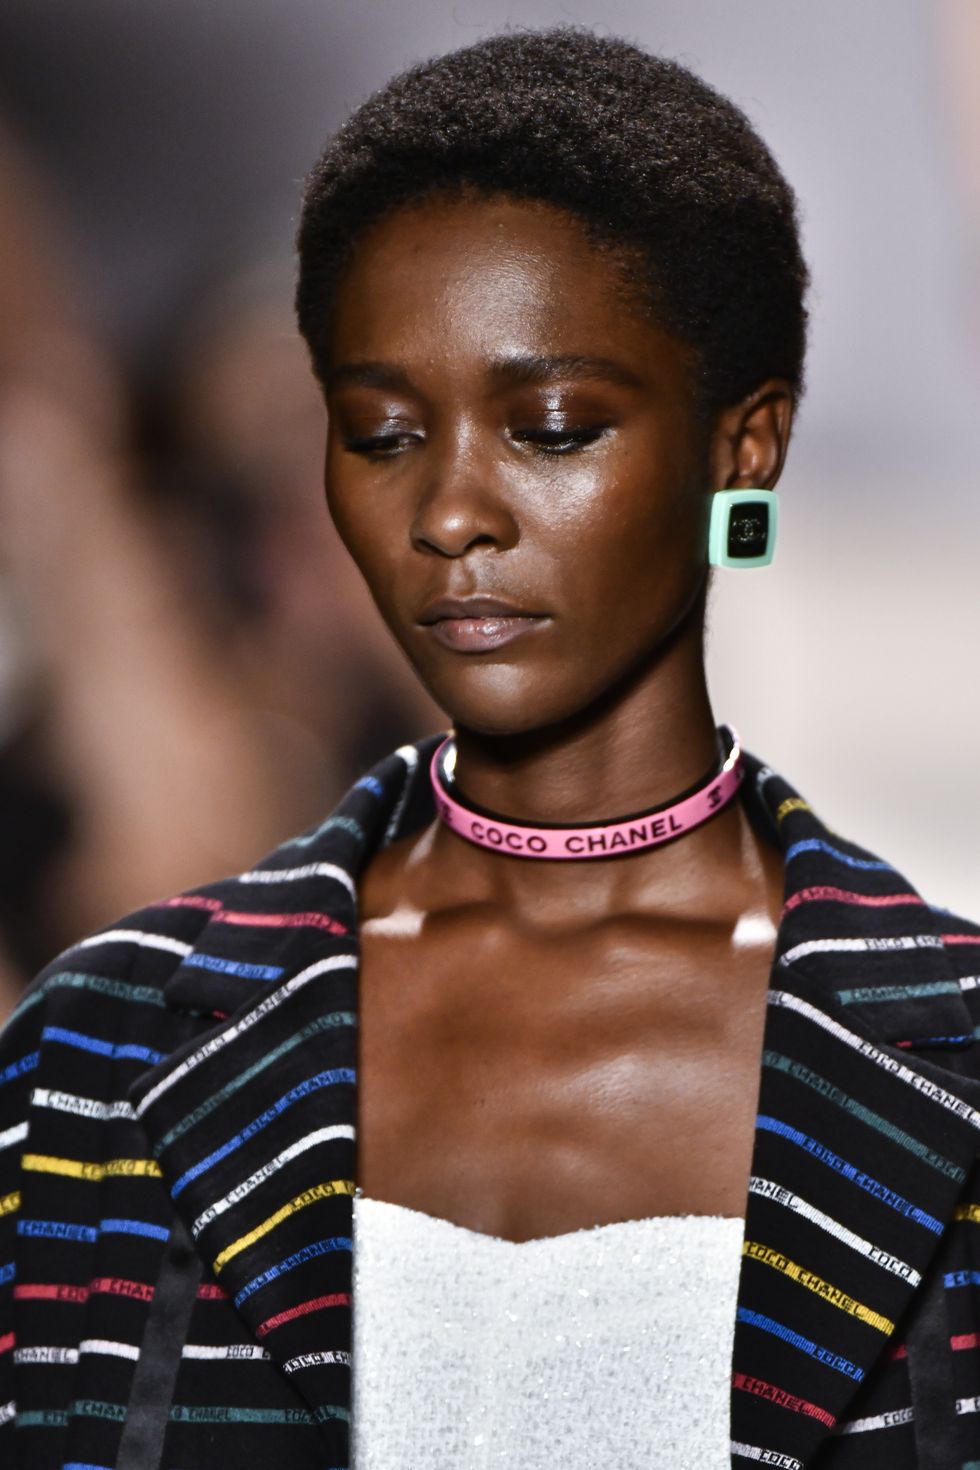 Chanel La Comete for Spring 2022 - The Beauty Look Book